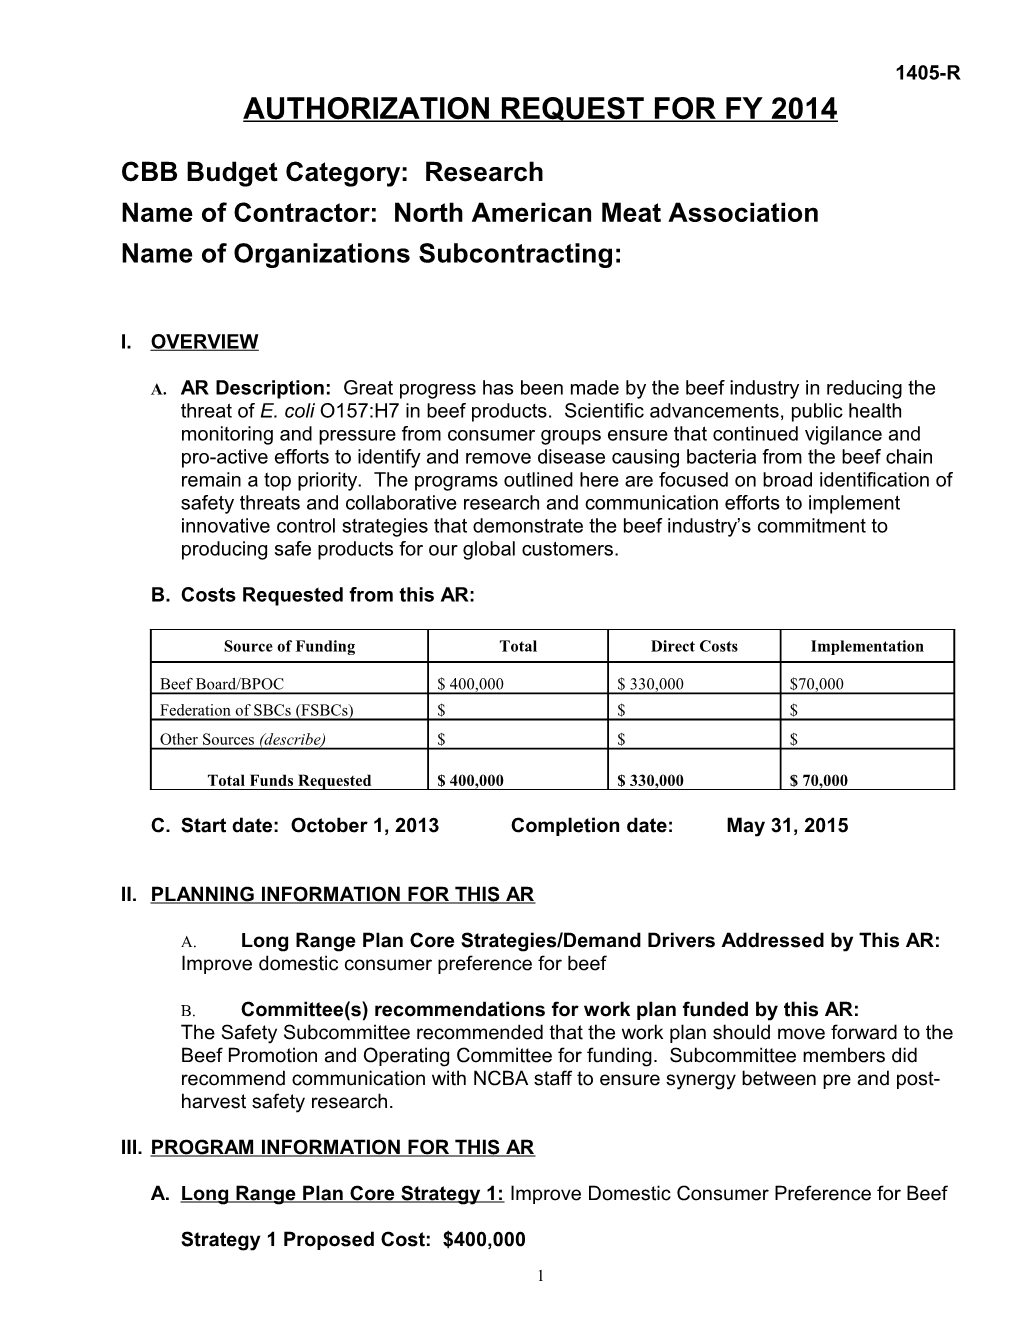 CBB Budget Category: Research